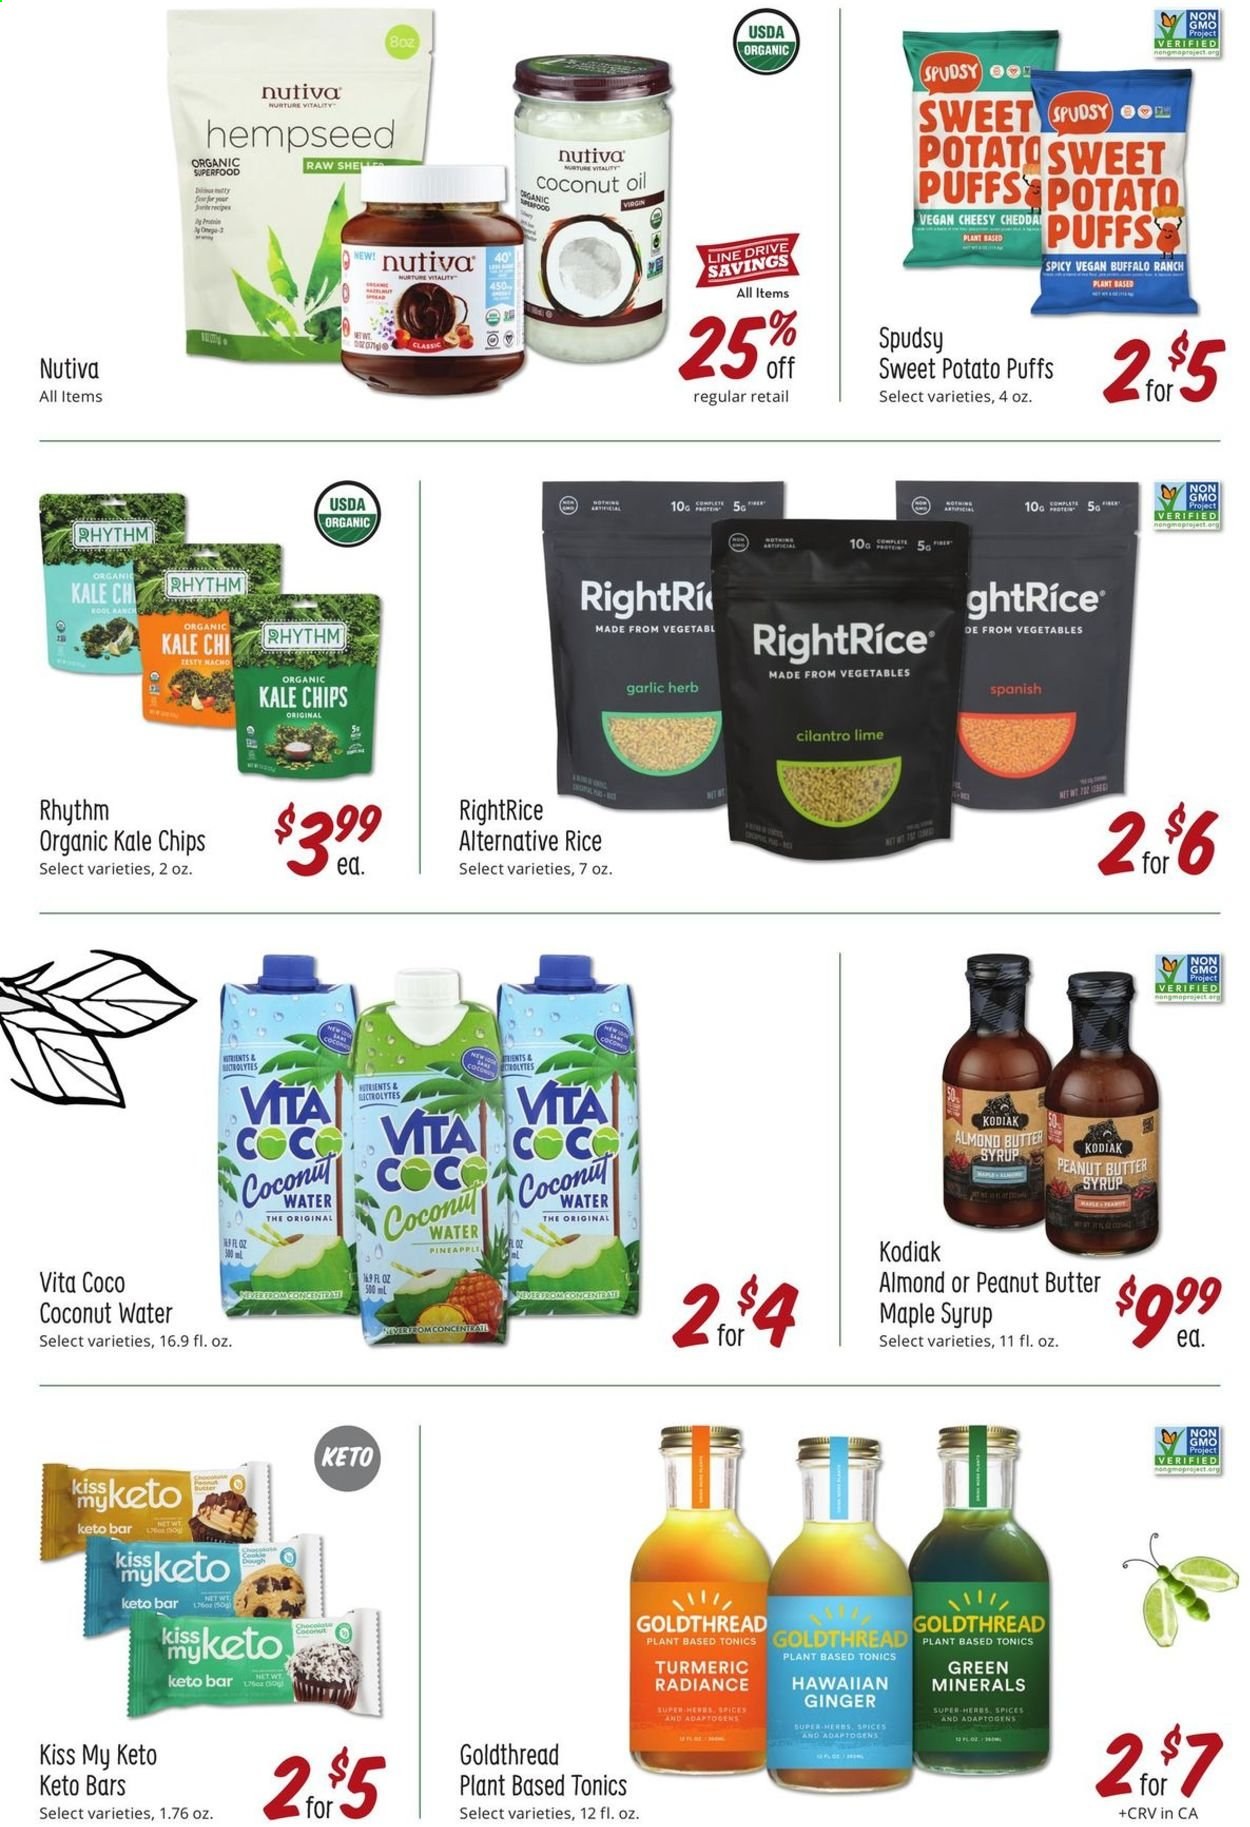 thumbnail - Sprouts Flyer - 05/26/2021 - 06/22/2021 - Sales products - puffs, garlic, ginger, sweet potato, kale, pineapple, almond butter, chips, rice, cilantro, turmeric, herbs, coconut oil, oil, maple syrup, peanut butter, syrup, coconut water. Page 12.